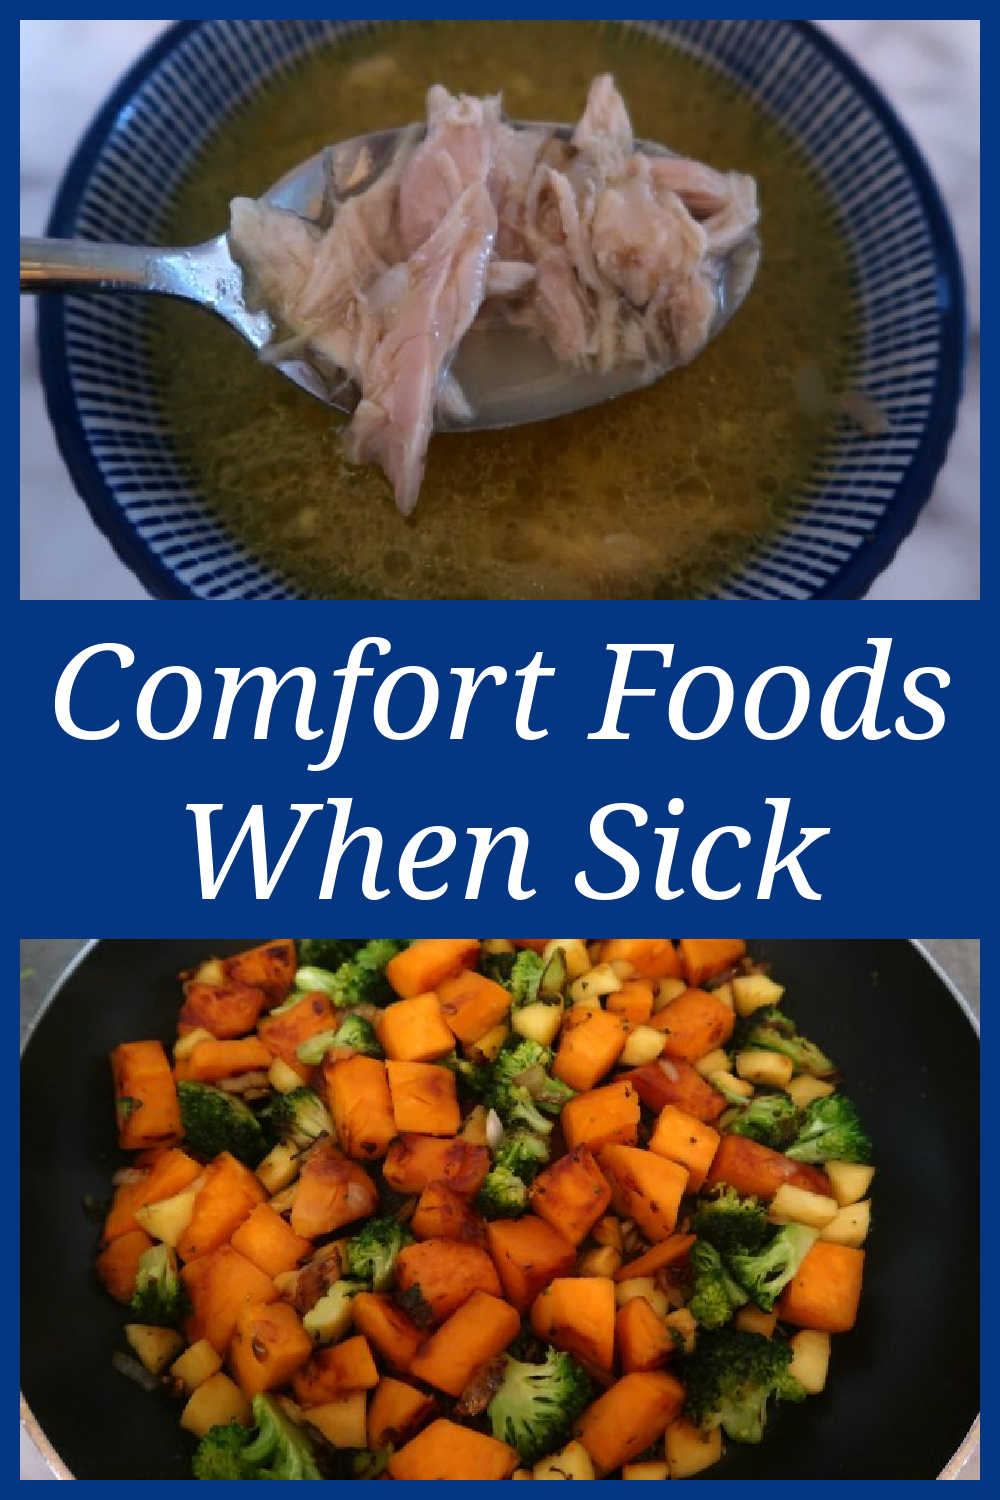 Comfort Foods When Sick - The best recipes and meals to eat - food ideas for when you're unwell and need comforting.